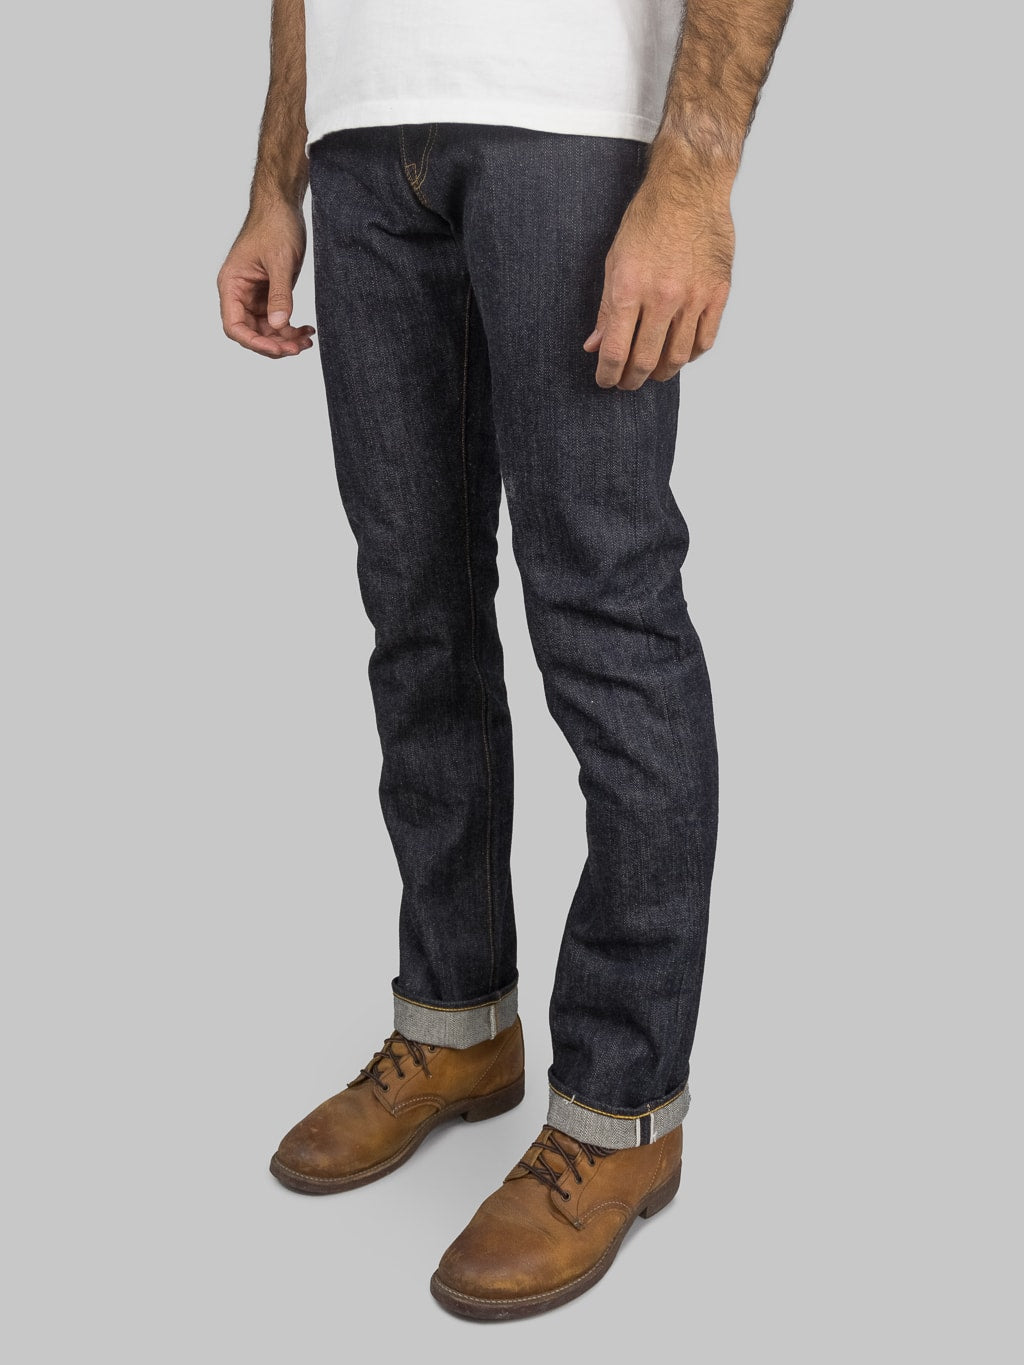 The Flat Head 3004 Regular Straight Jeans  side fit